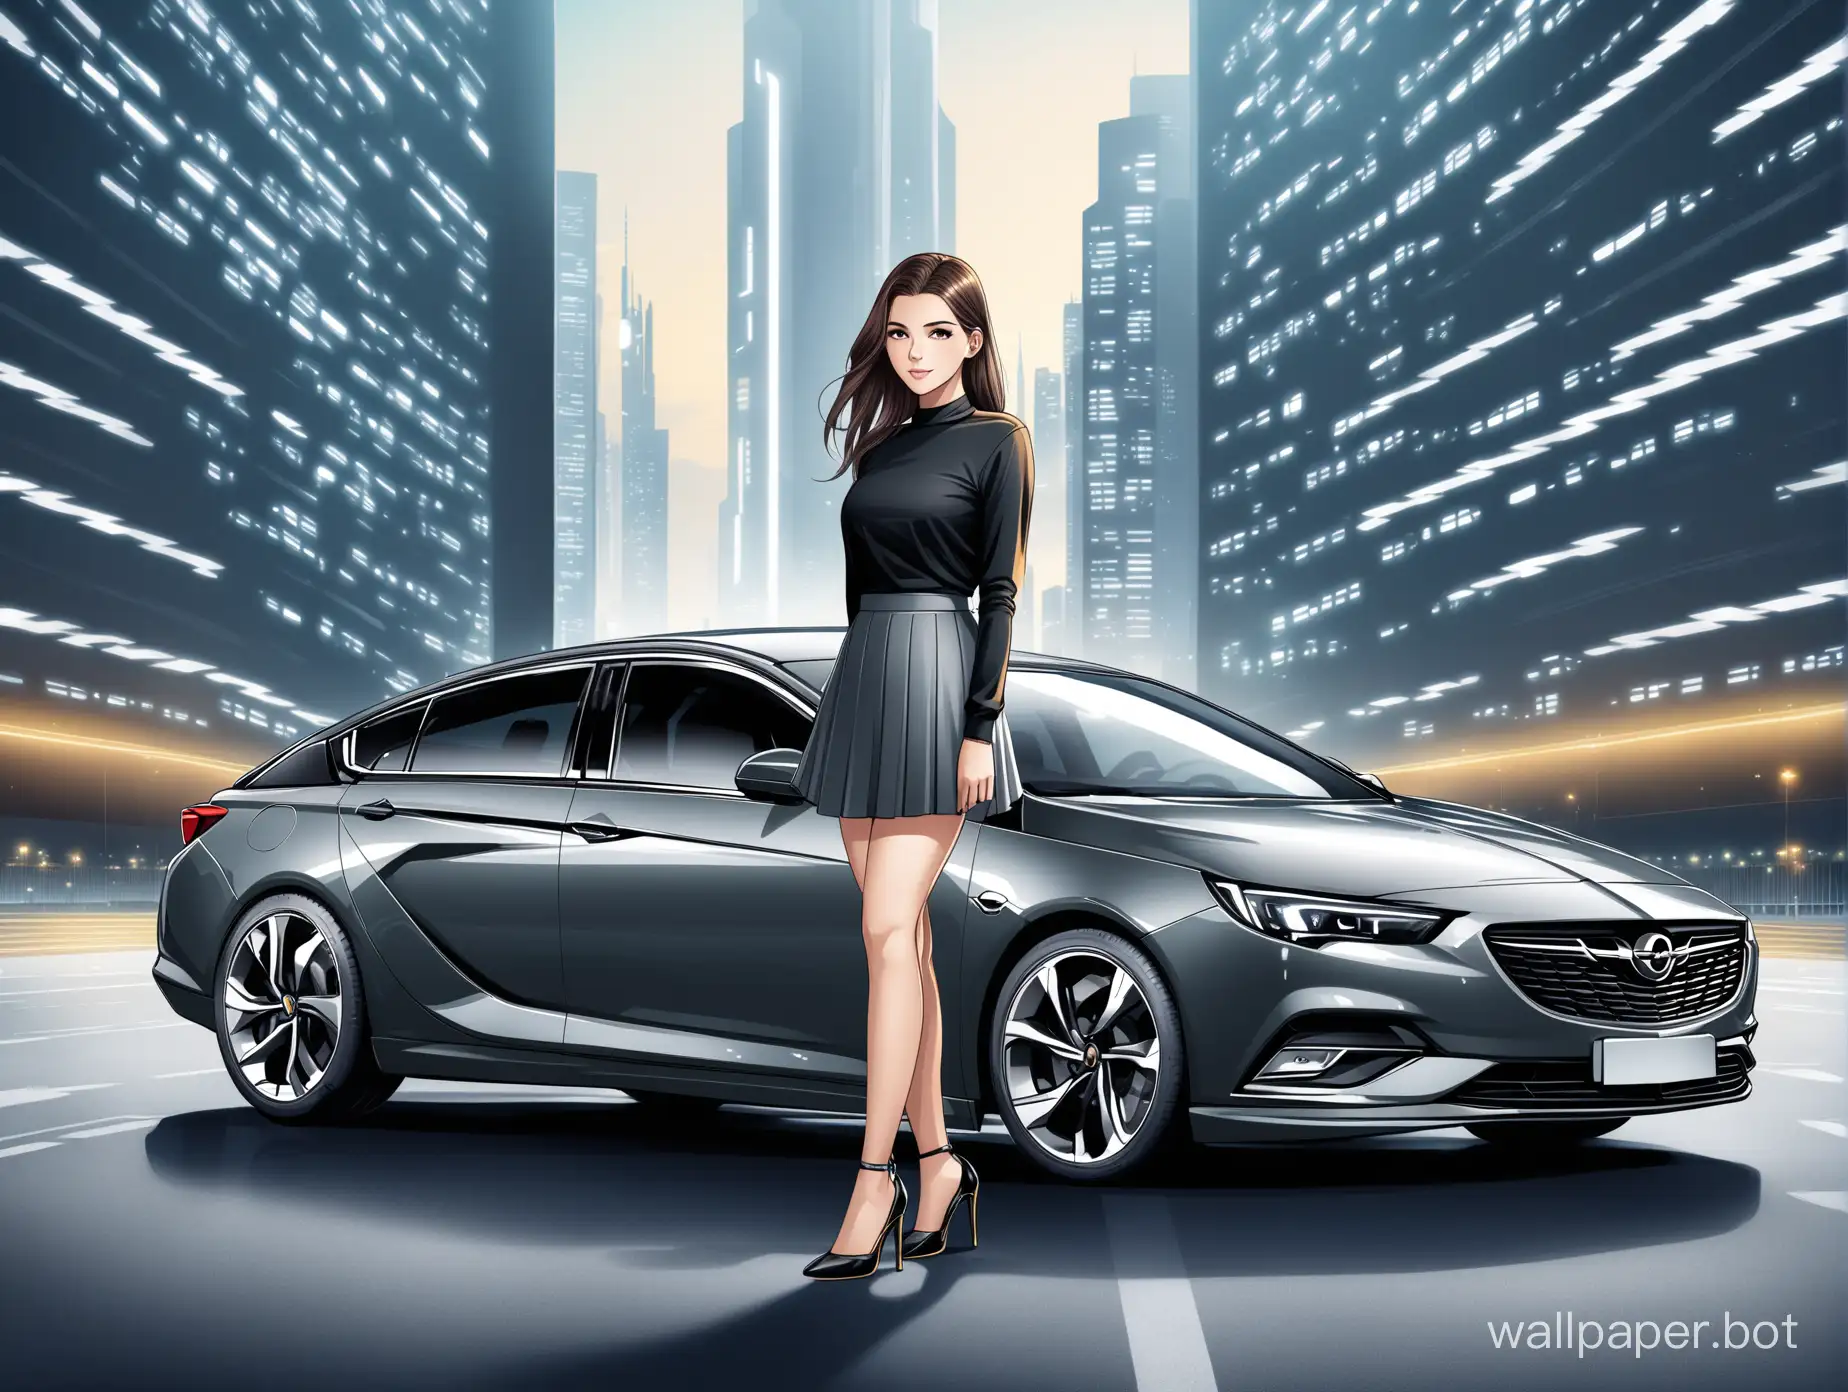 Opel insignia grand sport car in dark grey color with a brunette girl in skirt, high heels standing next to it, with futuristic city background